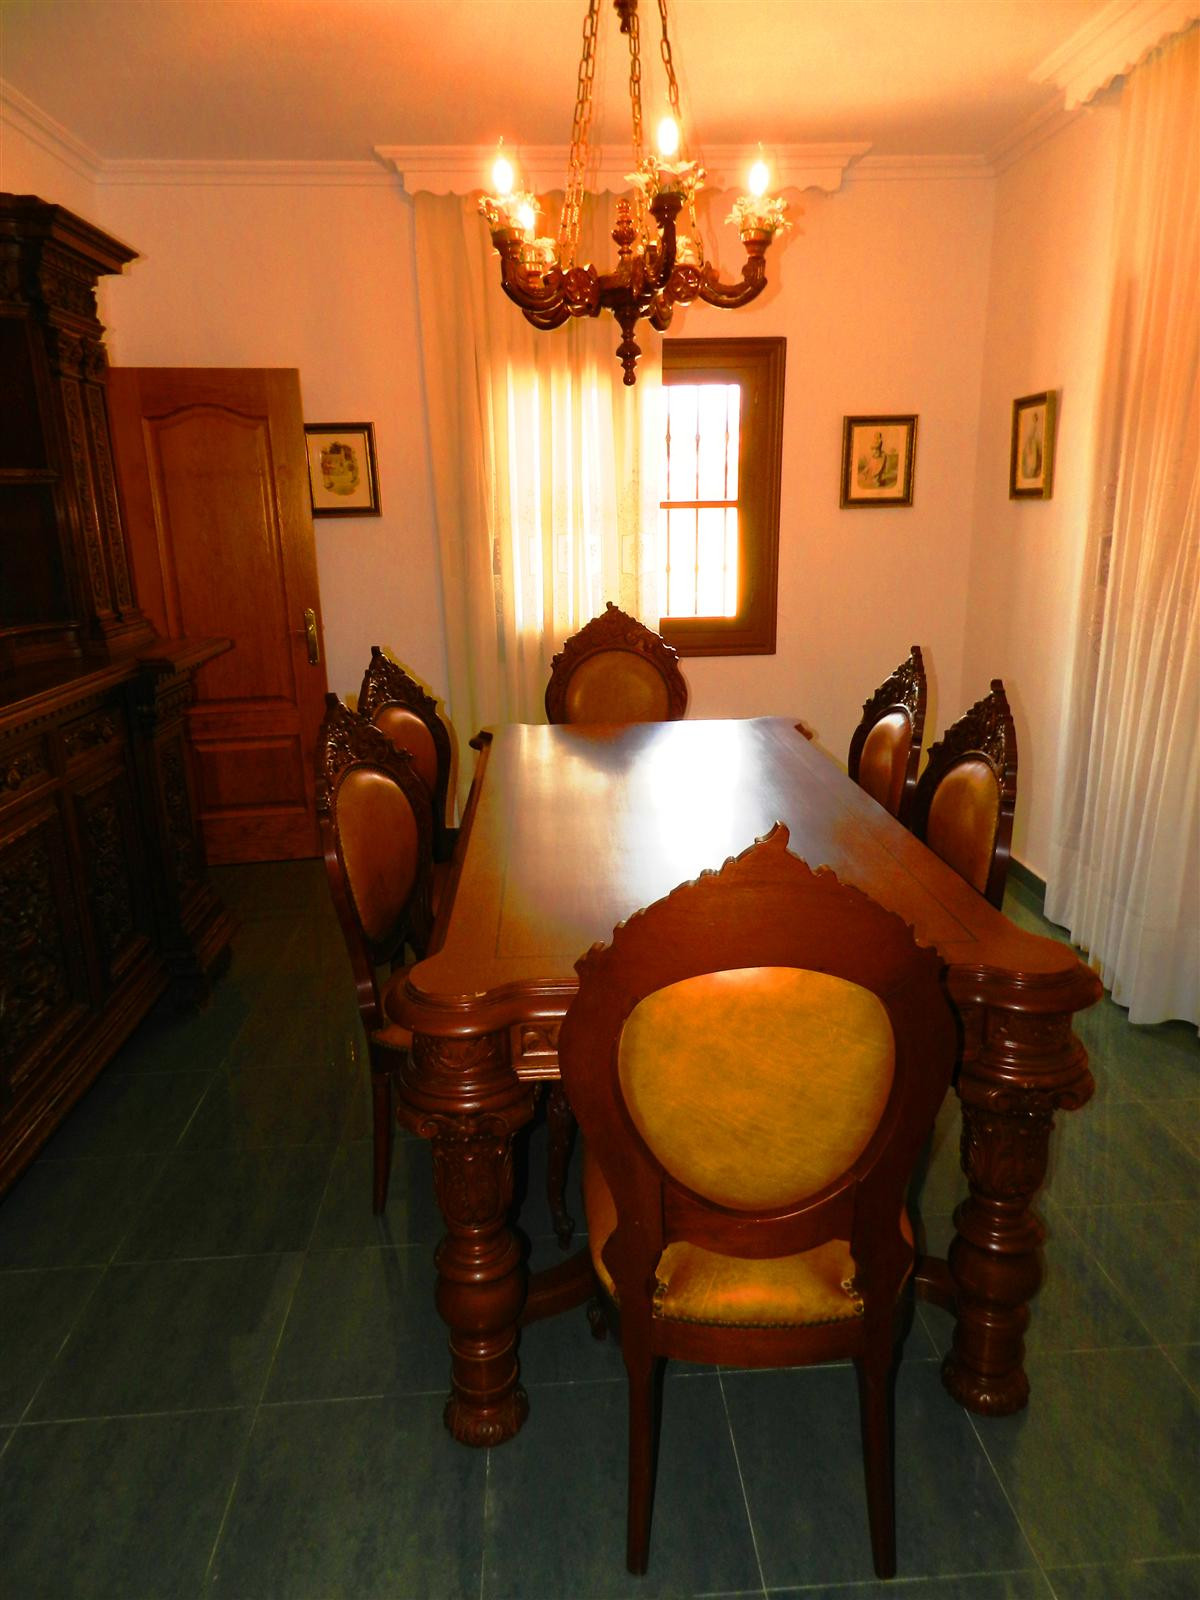 Beautiful villa in classic Andalusian style,